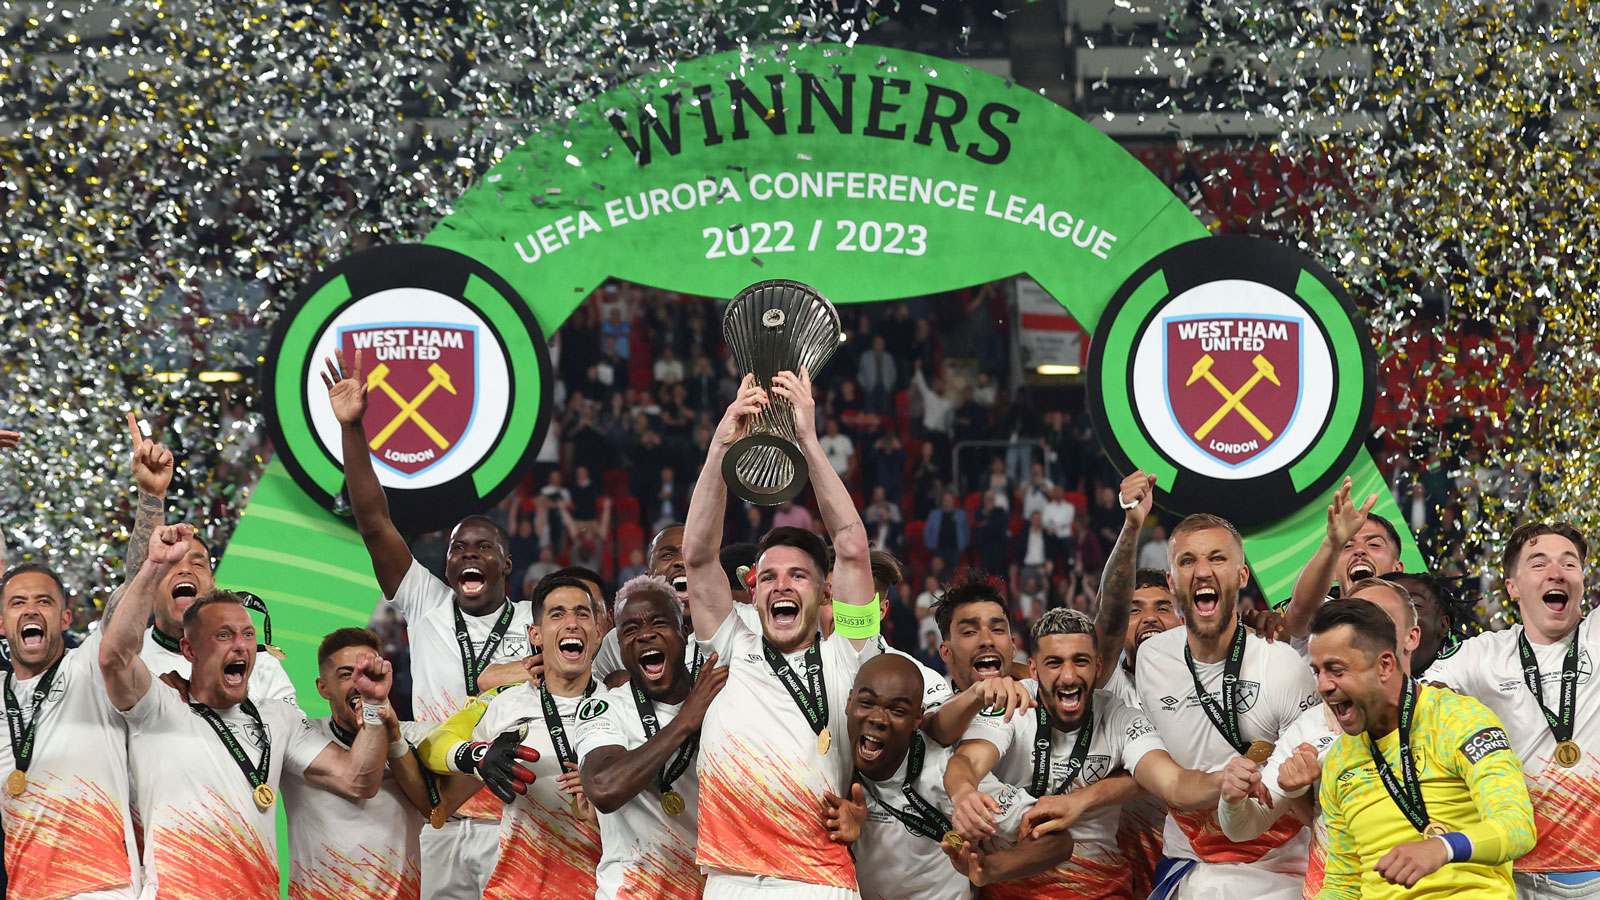 Declan Rice lifts the UEFA Europa Conference League trophy